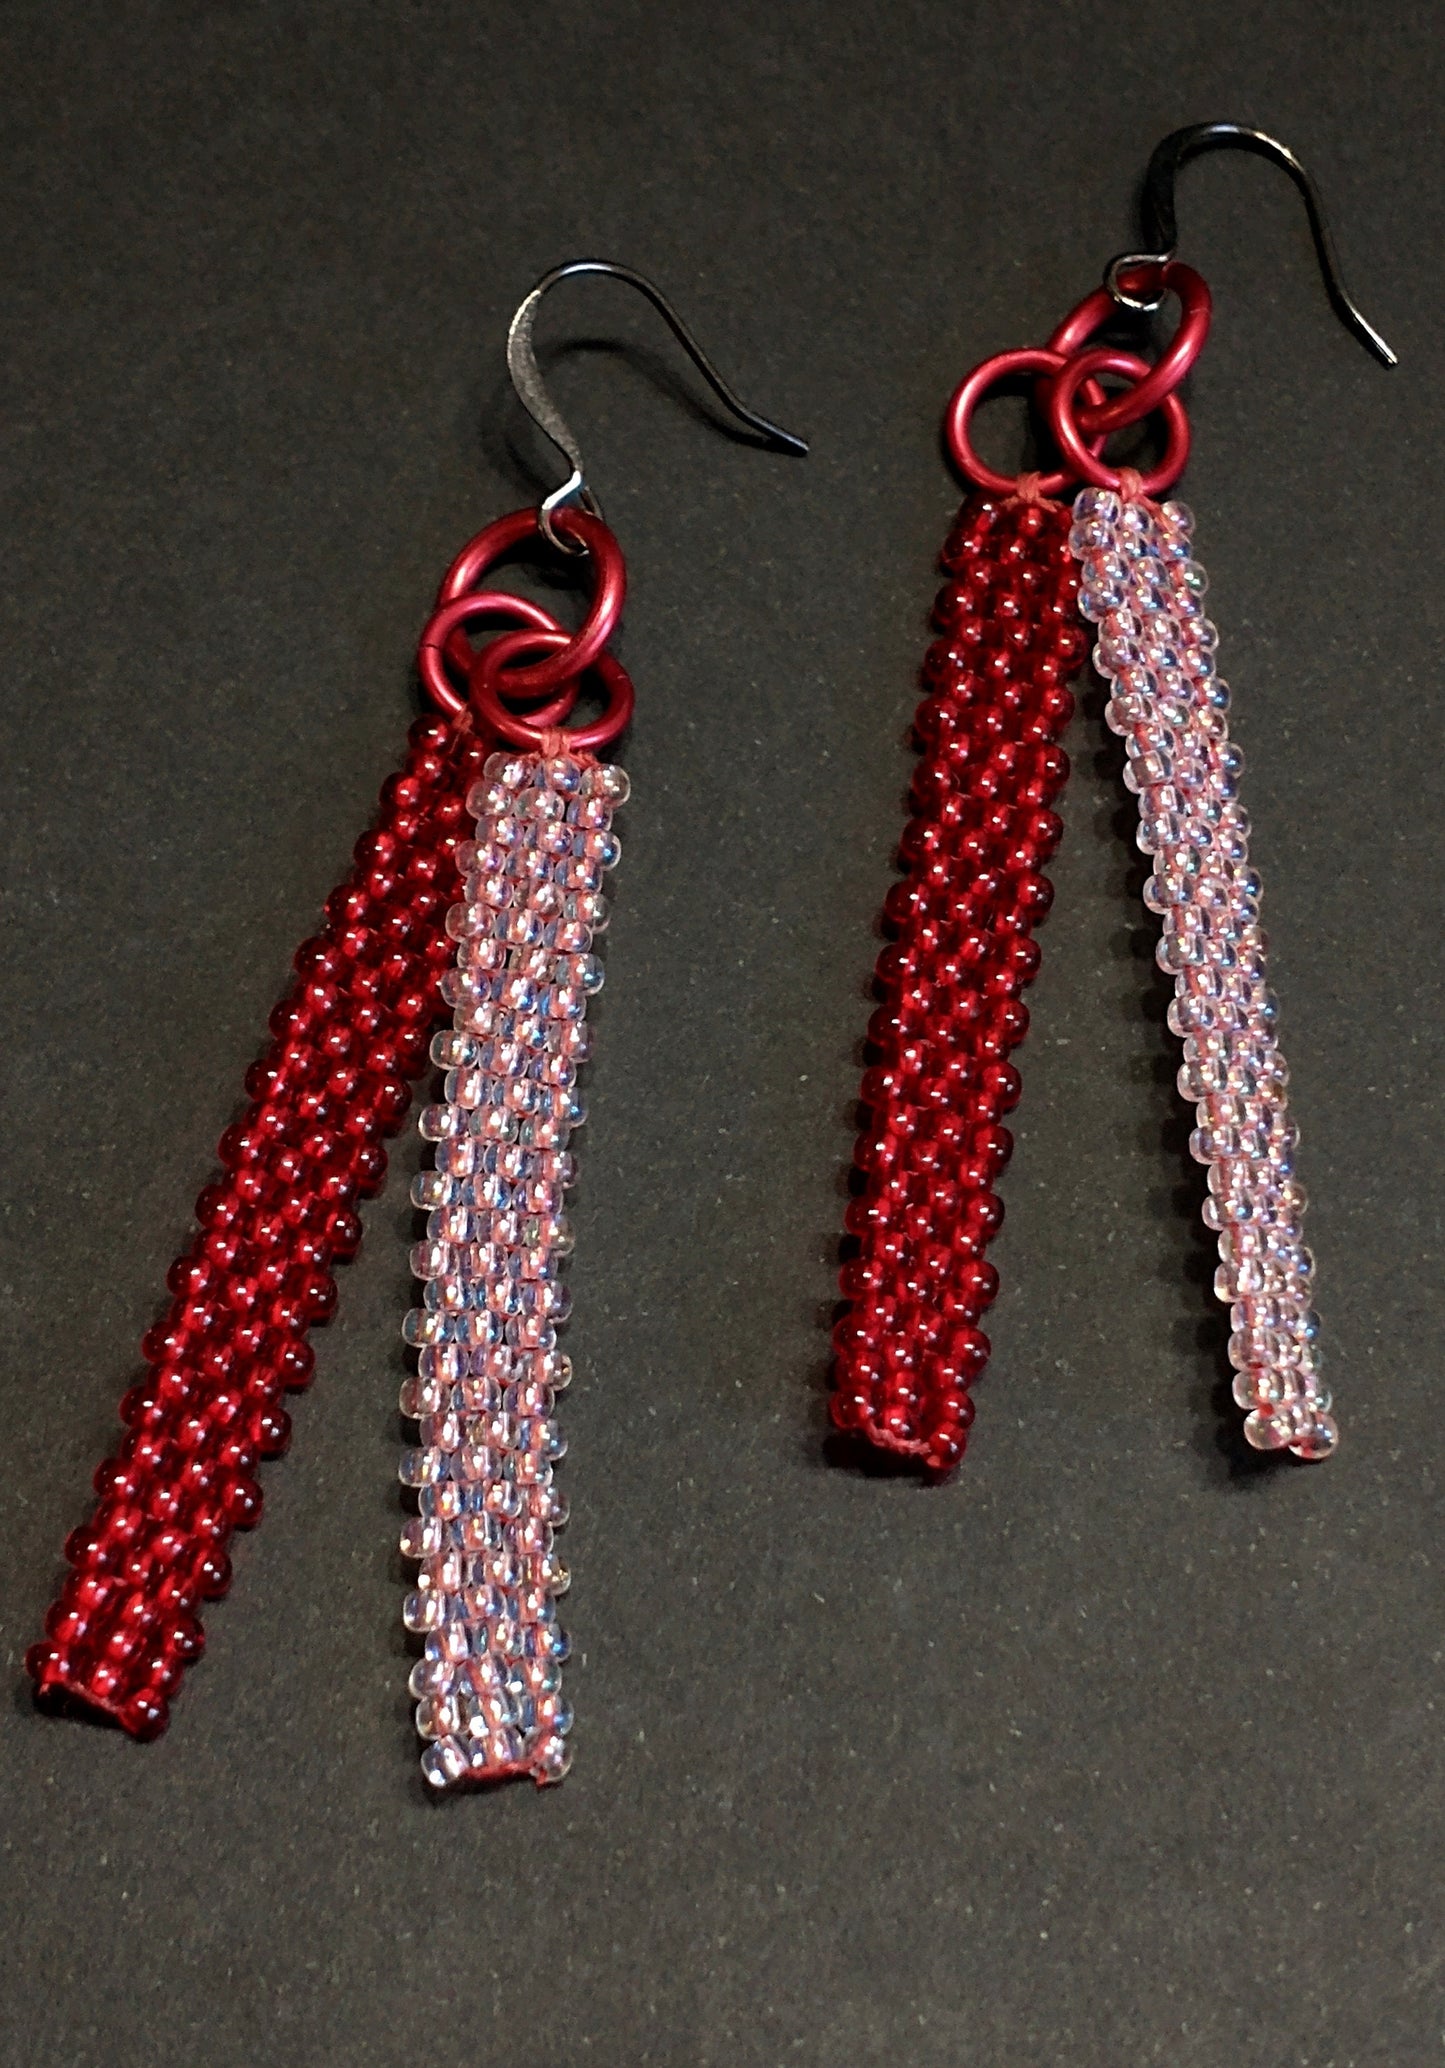 Minimalist Beaded Bar Drop Earrings | Romantic Red & Pink | Tiny Translucent Glass Seed Beads | Handwoven Everyday Dangles | 90s Aesthetic 